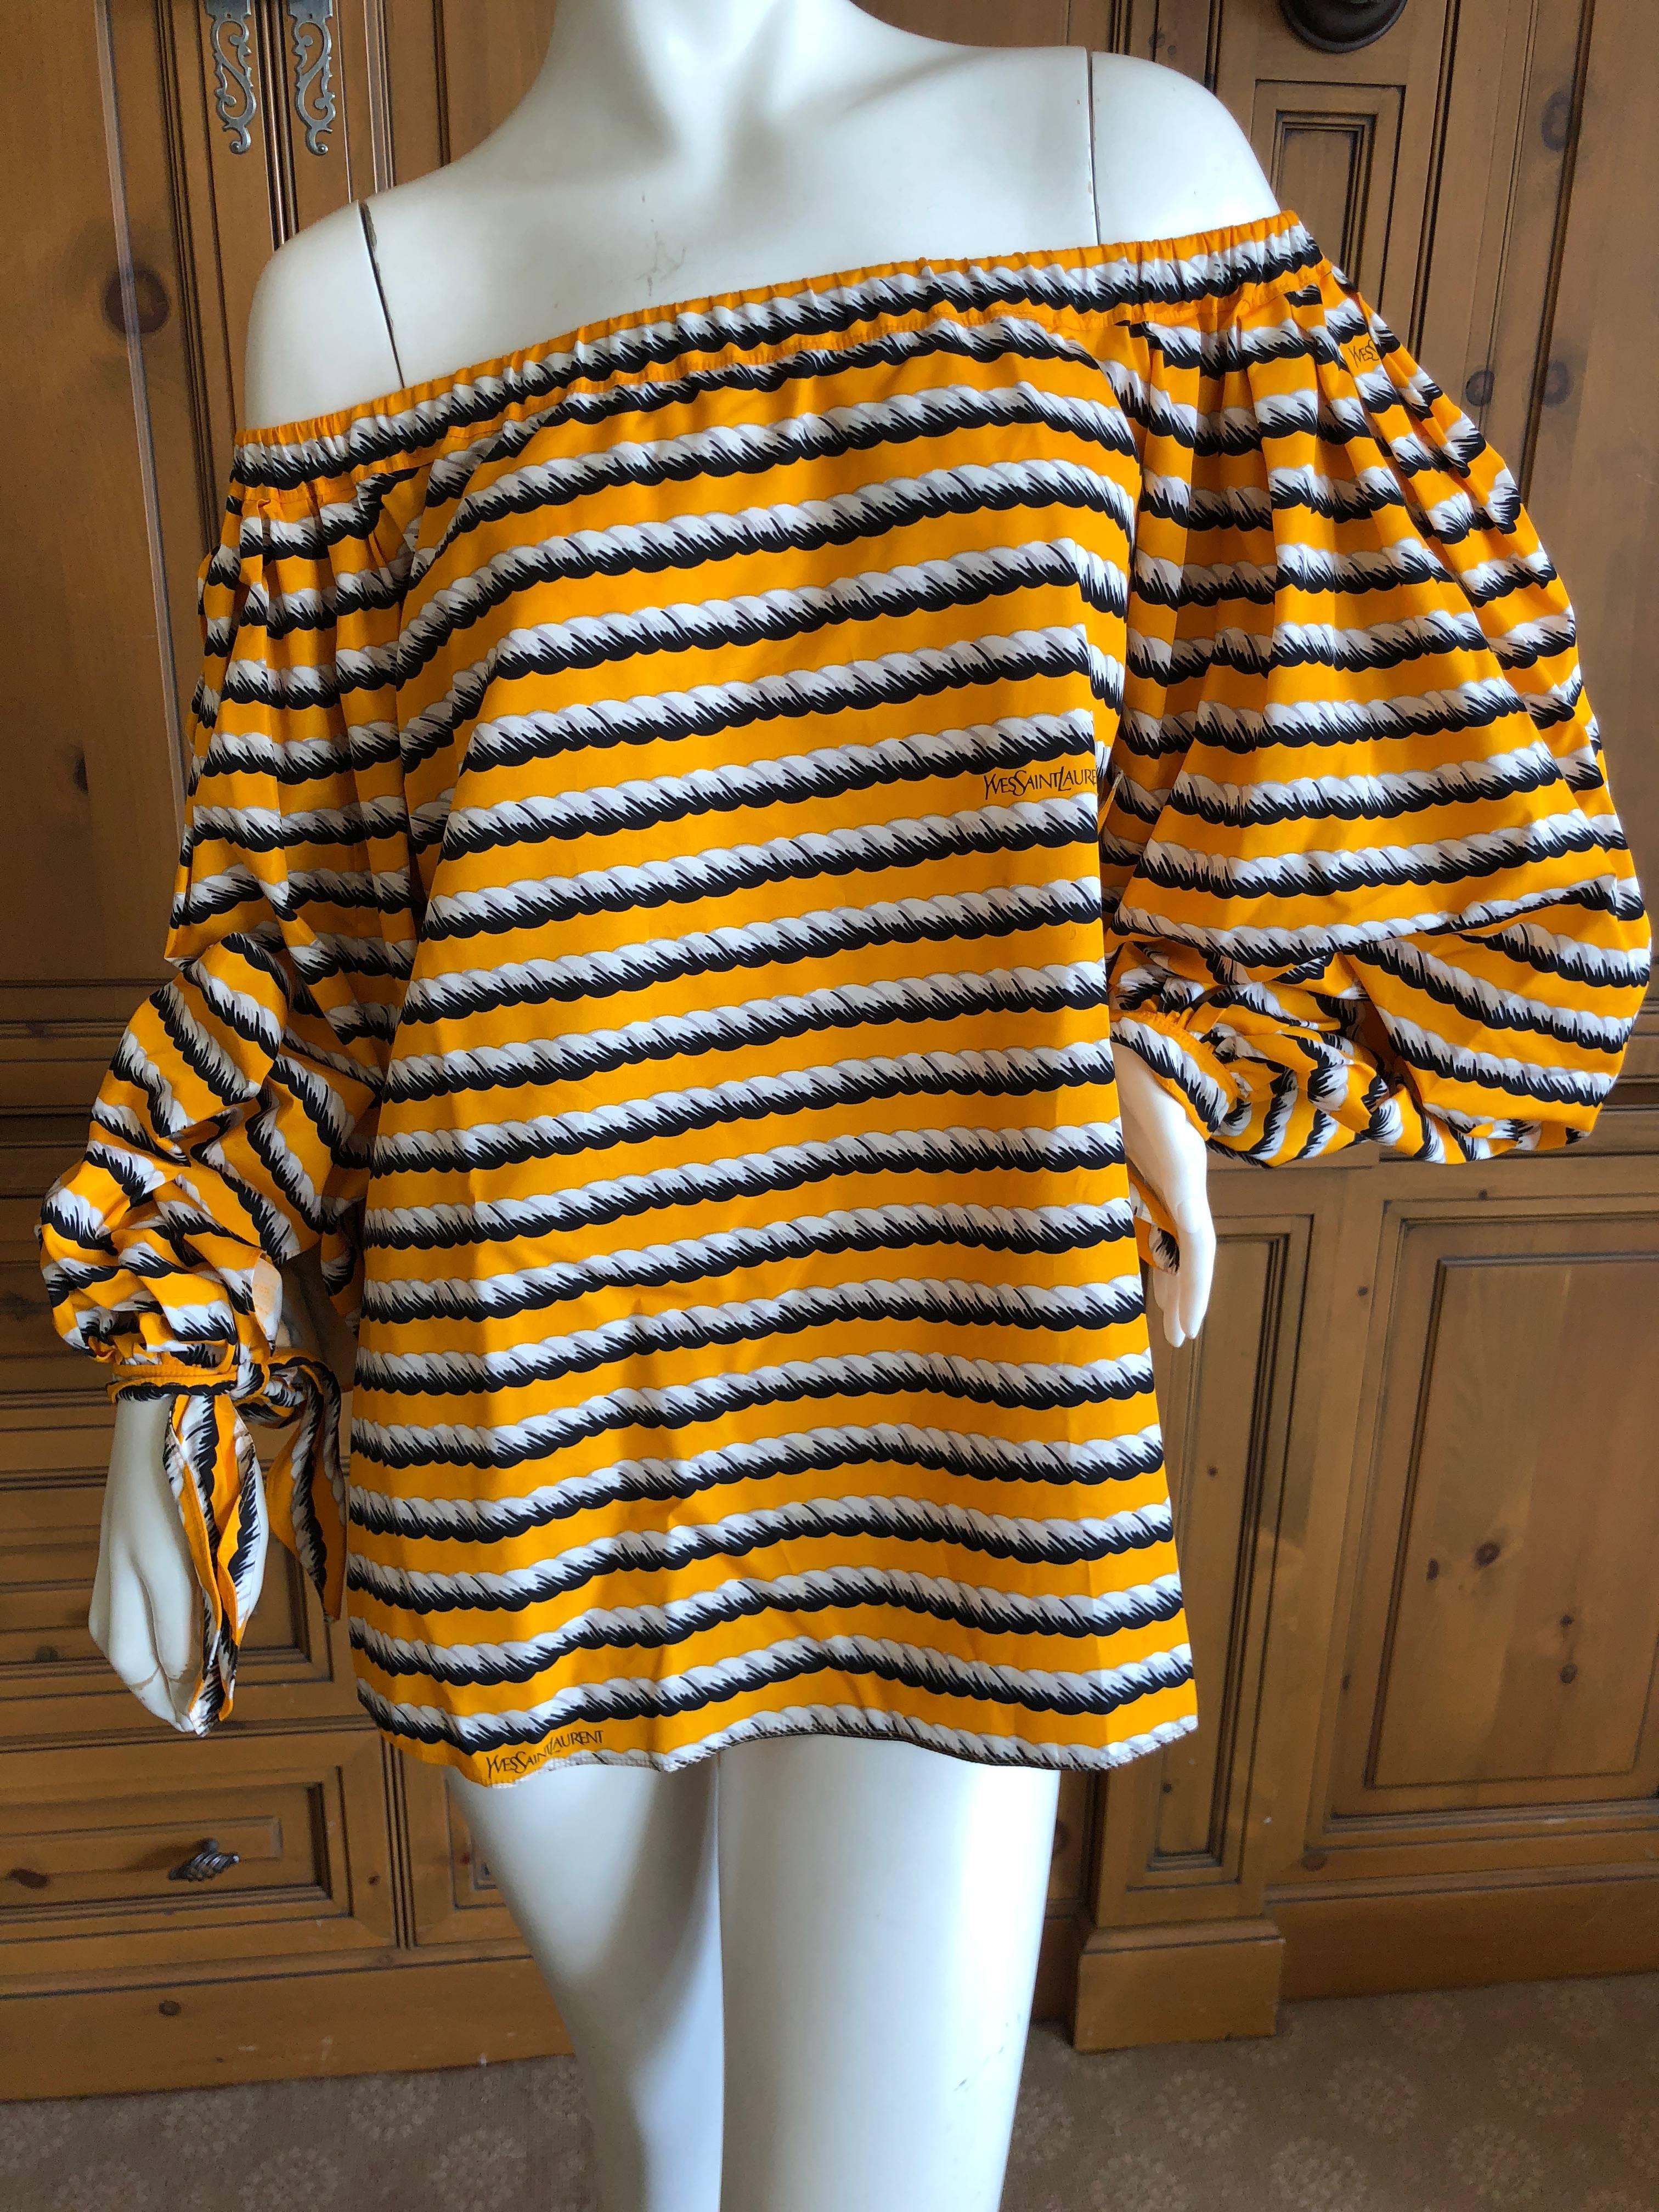 Yves Saint Laurent Rive Gauche Vintage Romantic Poet Sleeve Rope Print Top In Excellent Condition For Sale In Cloverdale, CA